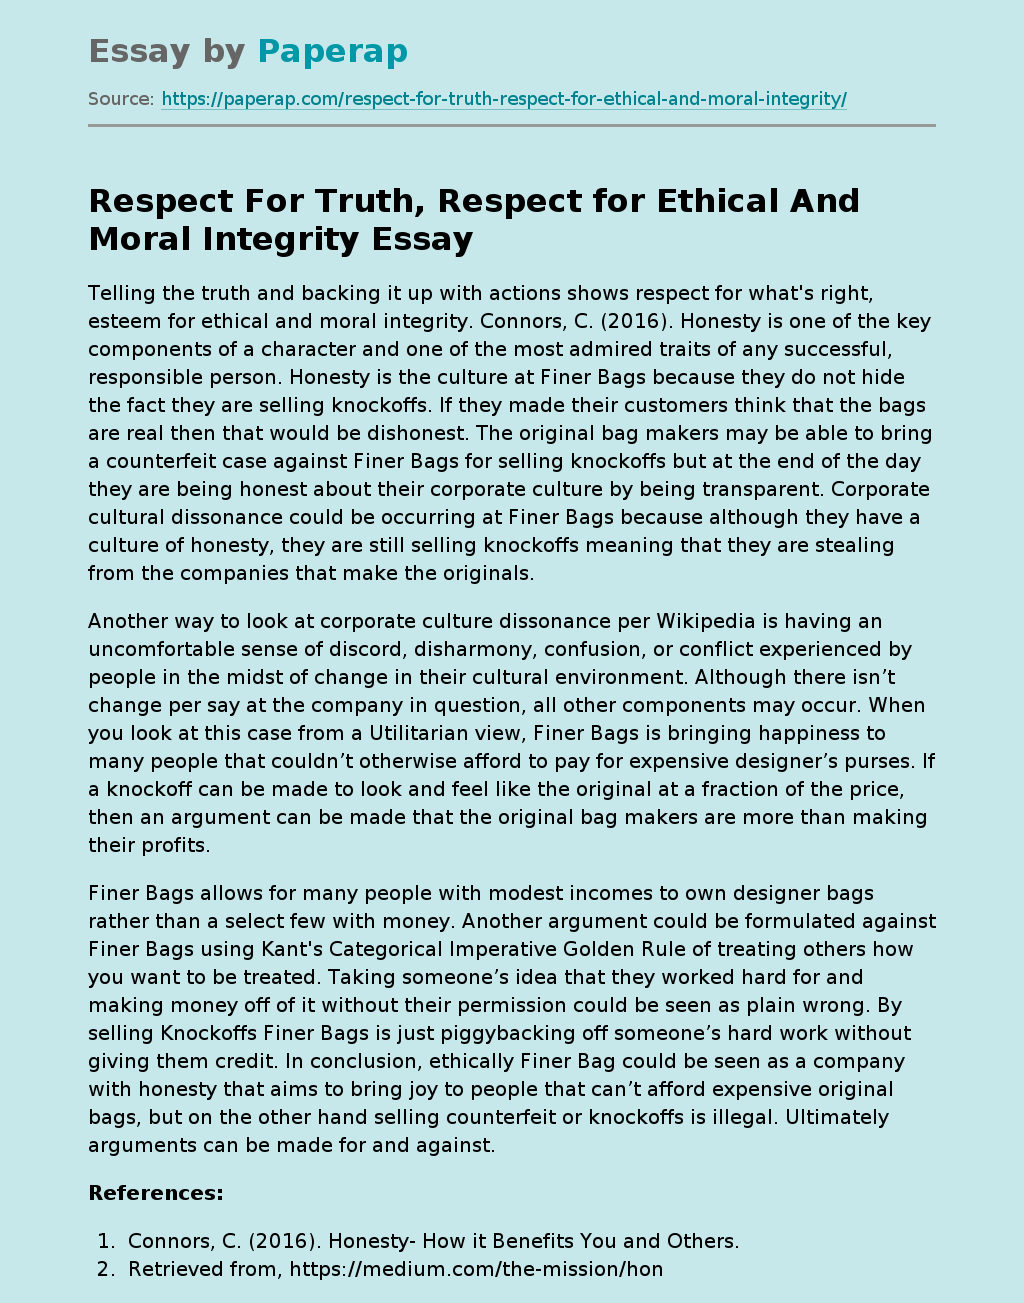 Respect For Truth, Respect for Ethical And Moral Integrity